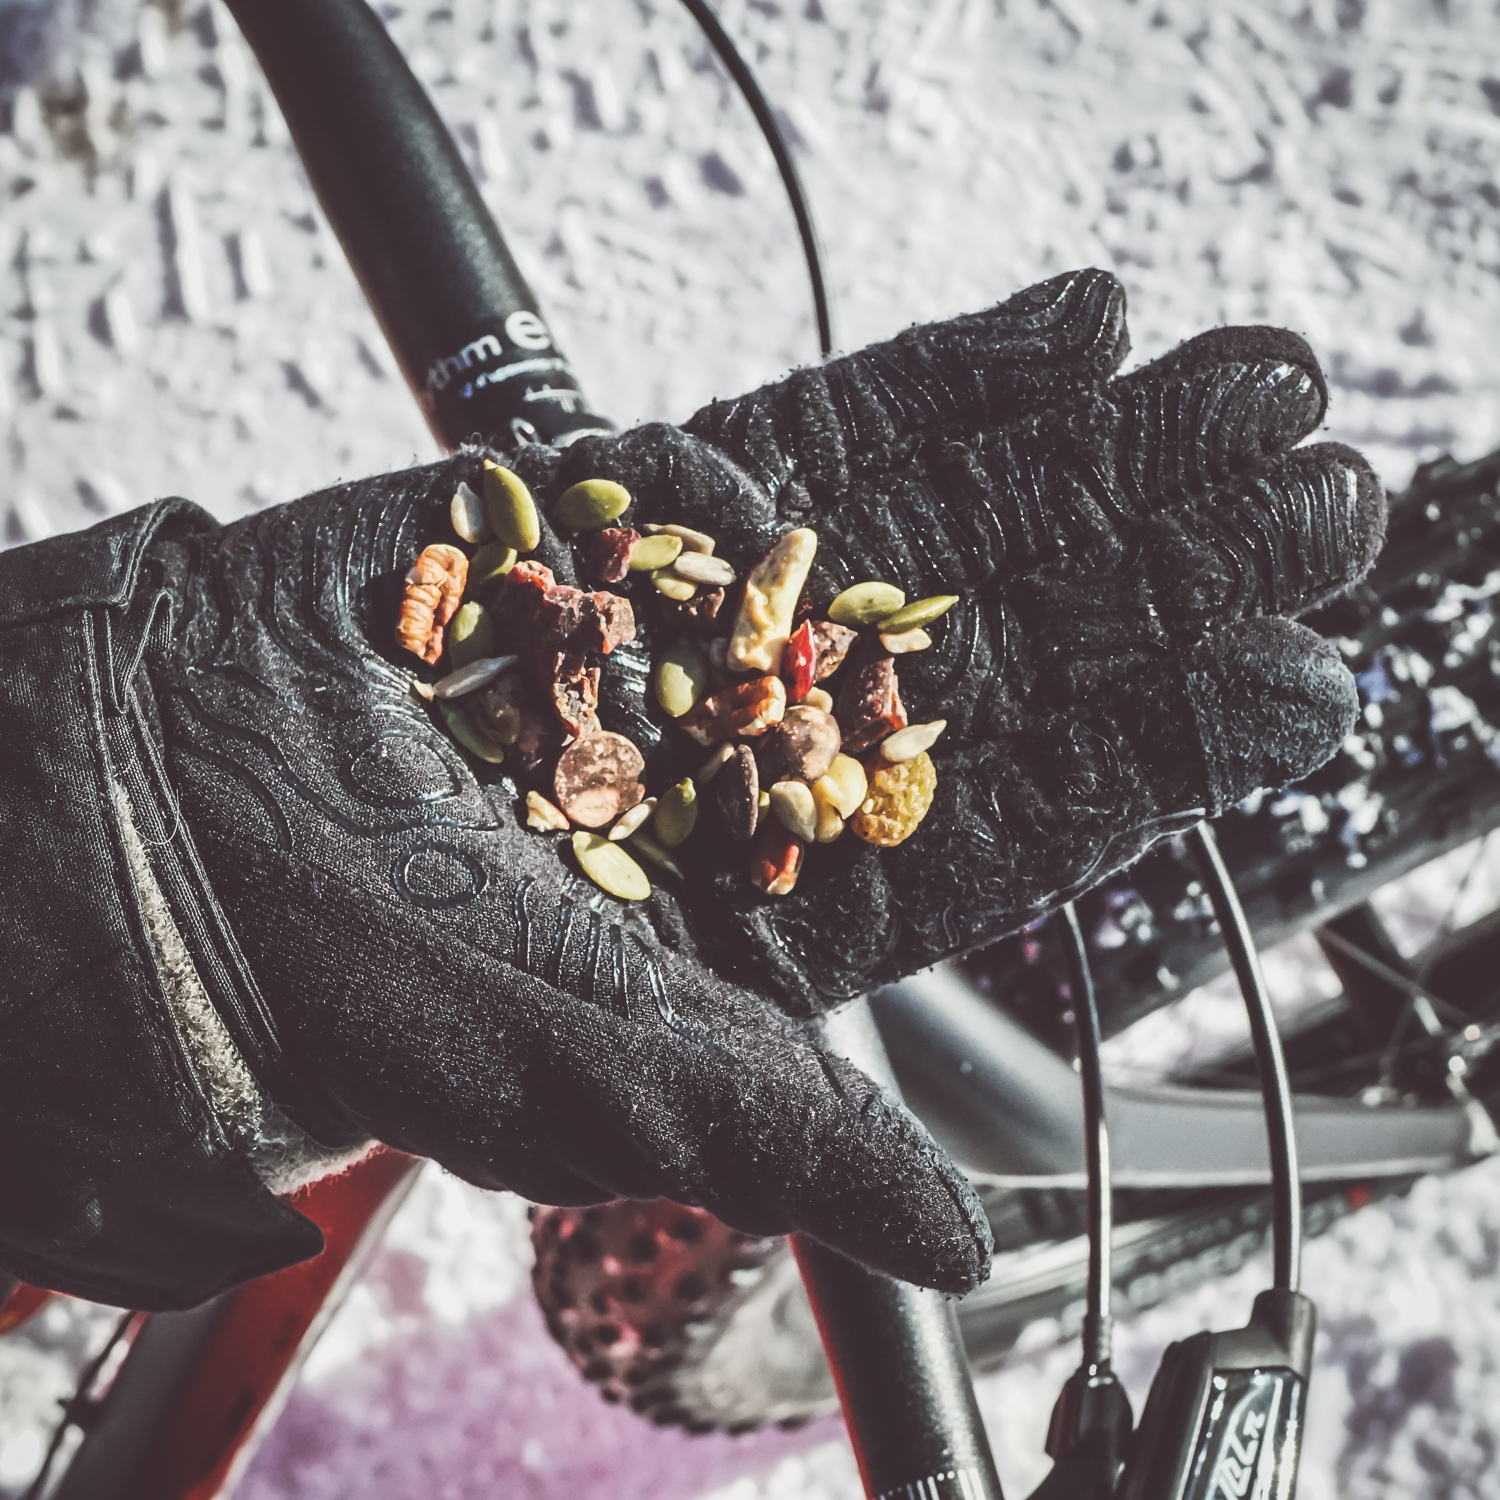 Trail Mix with Jerky enjoyed after a winter bike ride 